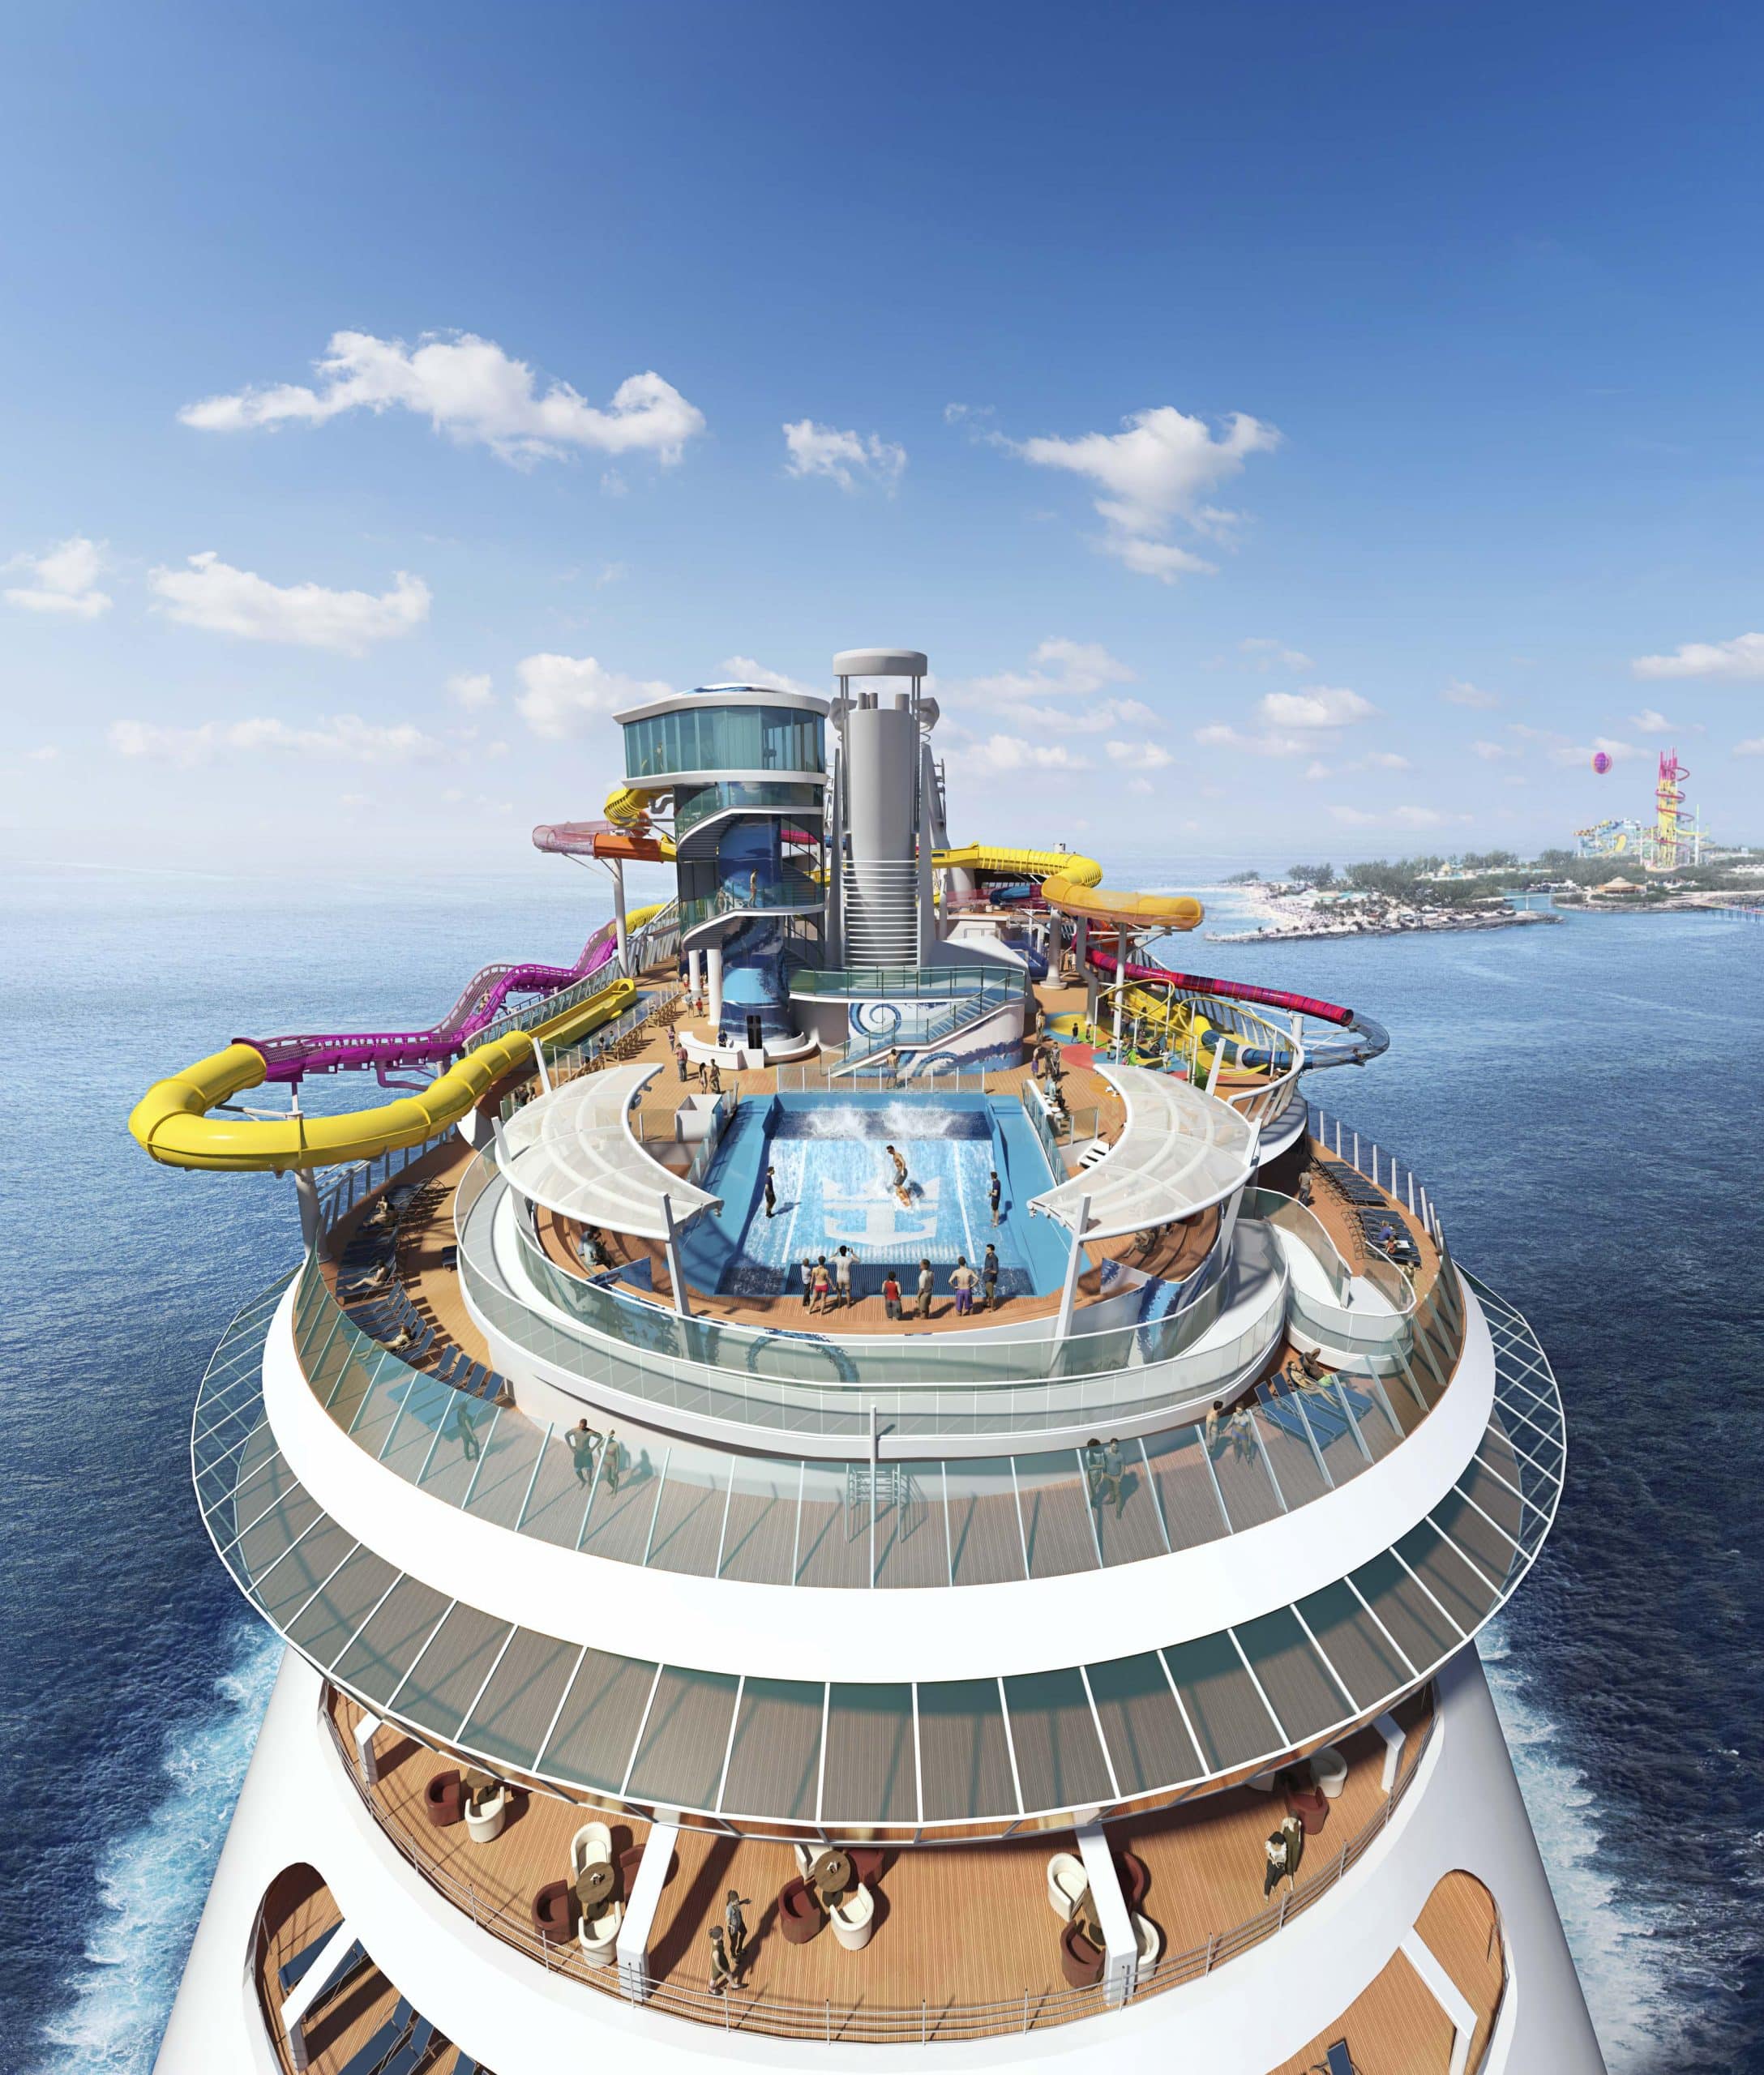 Navigator of the Seas will have the world